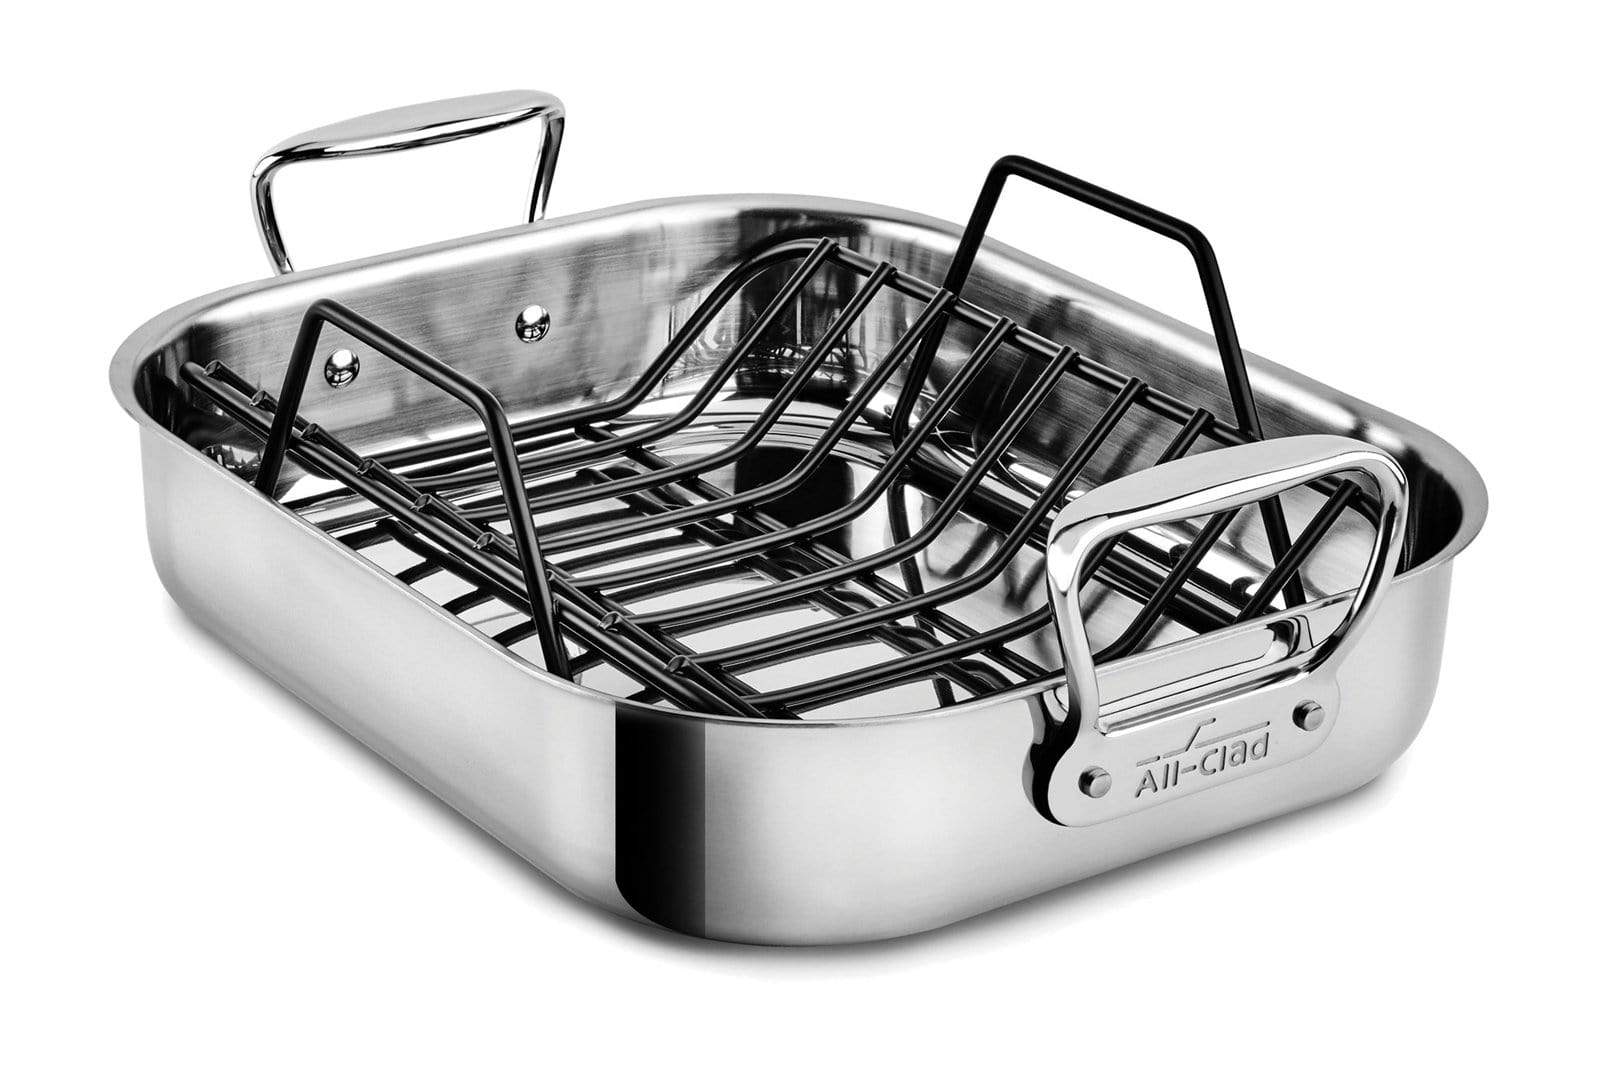 All-Clad Roaster All-Clad Petite Stainless Steel Roaster with Rack